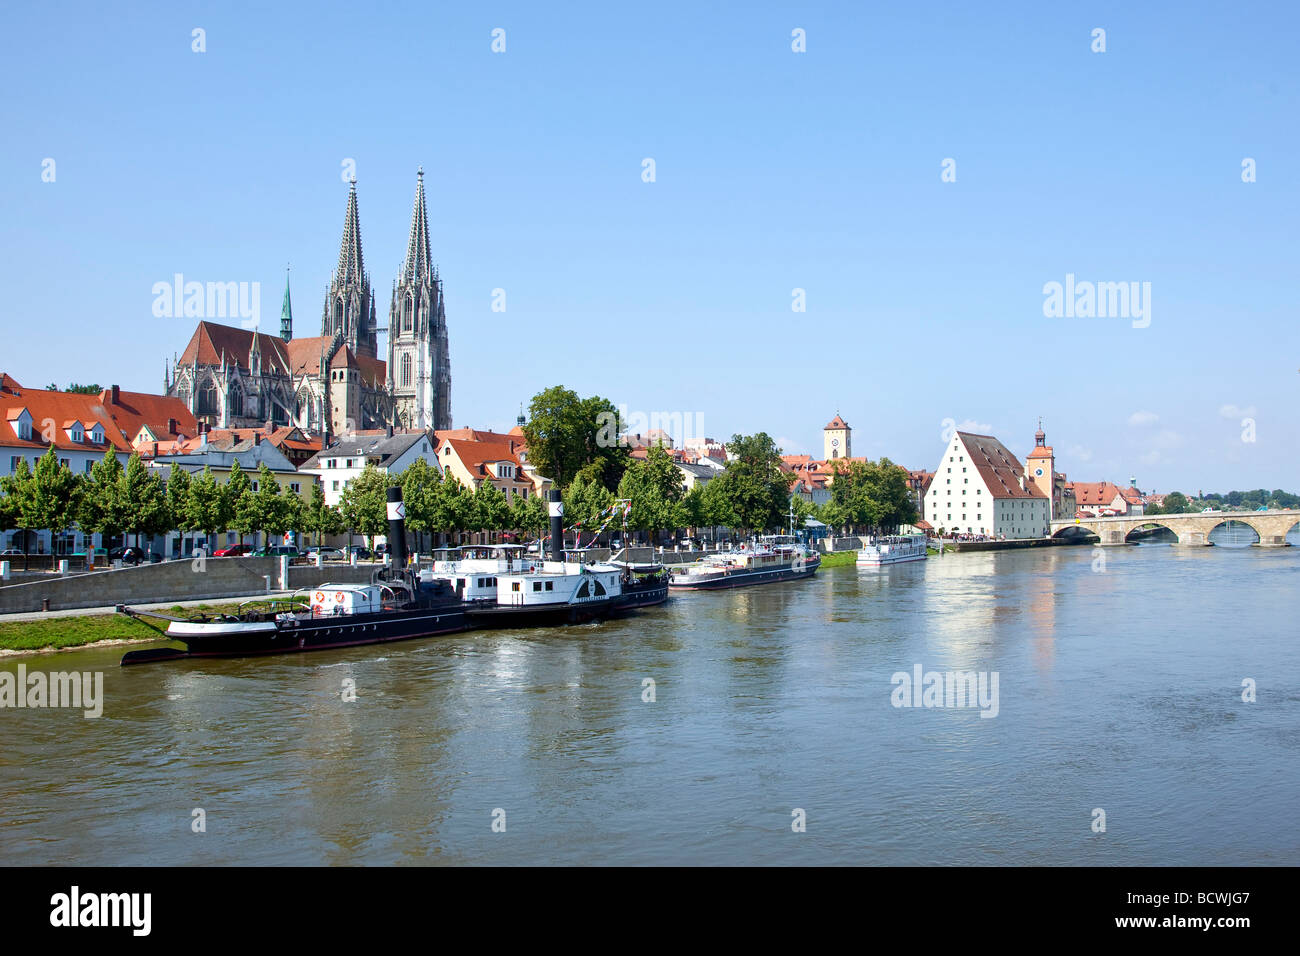 Regensburger Dom Cathedral of Saint Peter with the Schifffahrtsmuseum maritime museum on the Danube river, the Salzstadl salt s Stock Photo